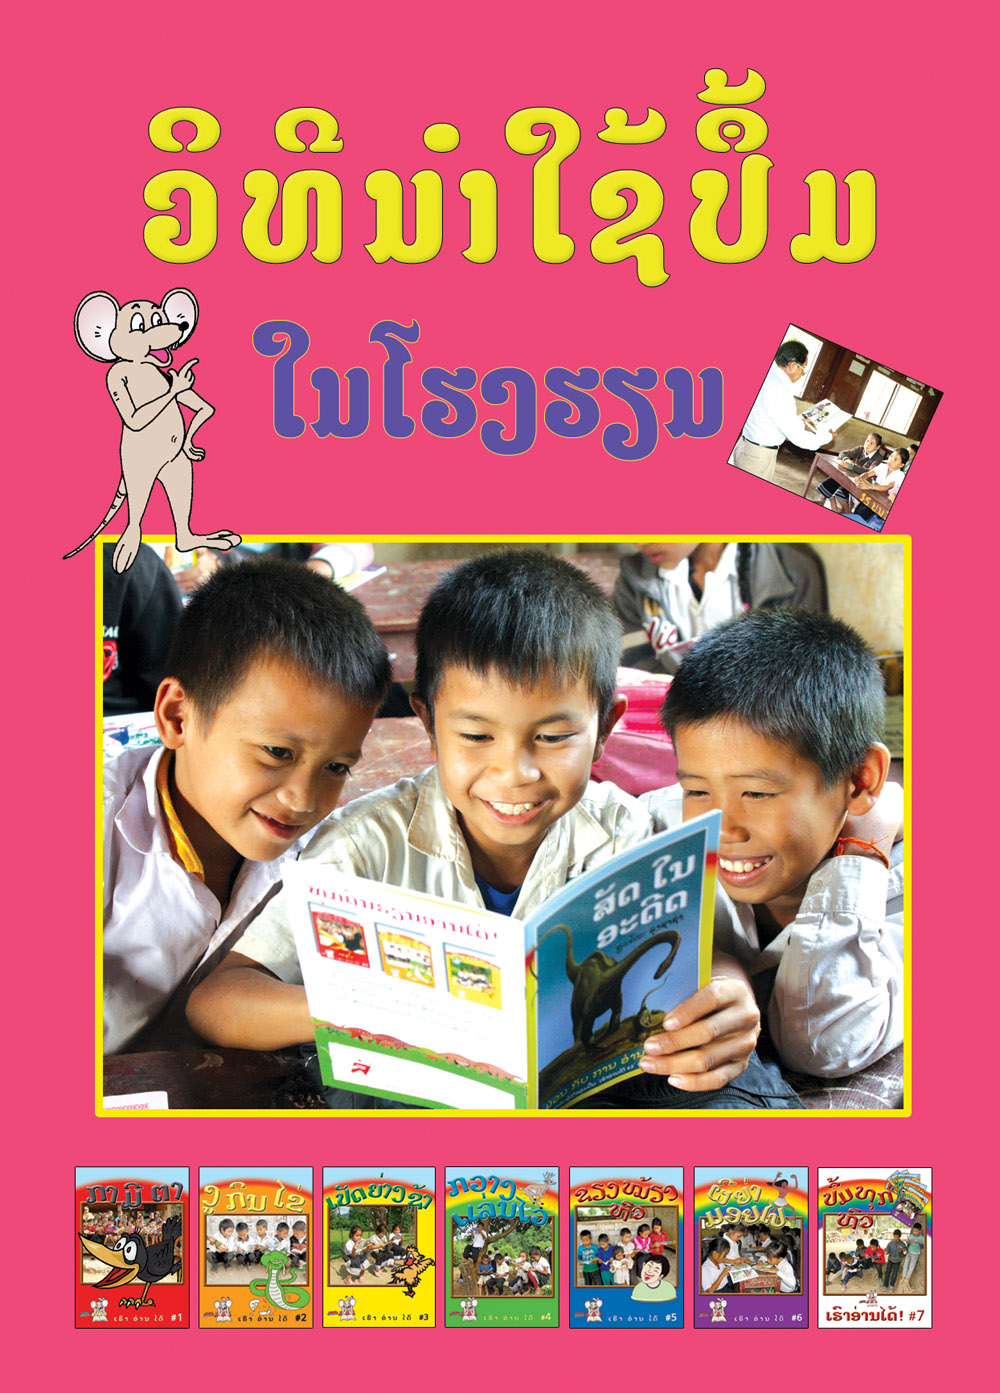 Sustained Silent Reading large book cover, published in Lao language